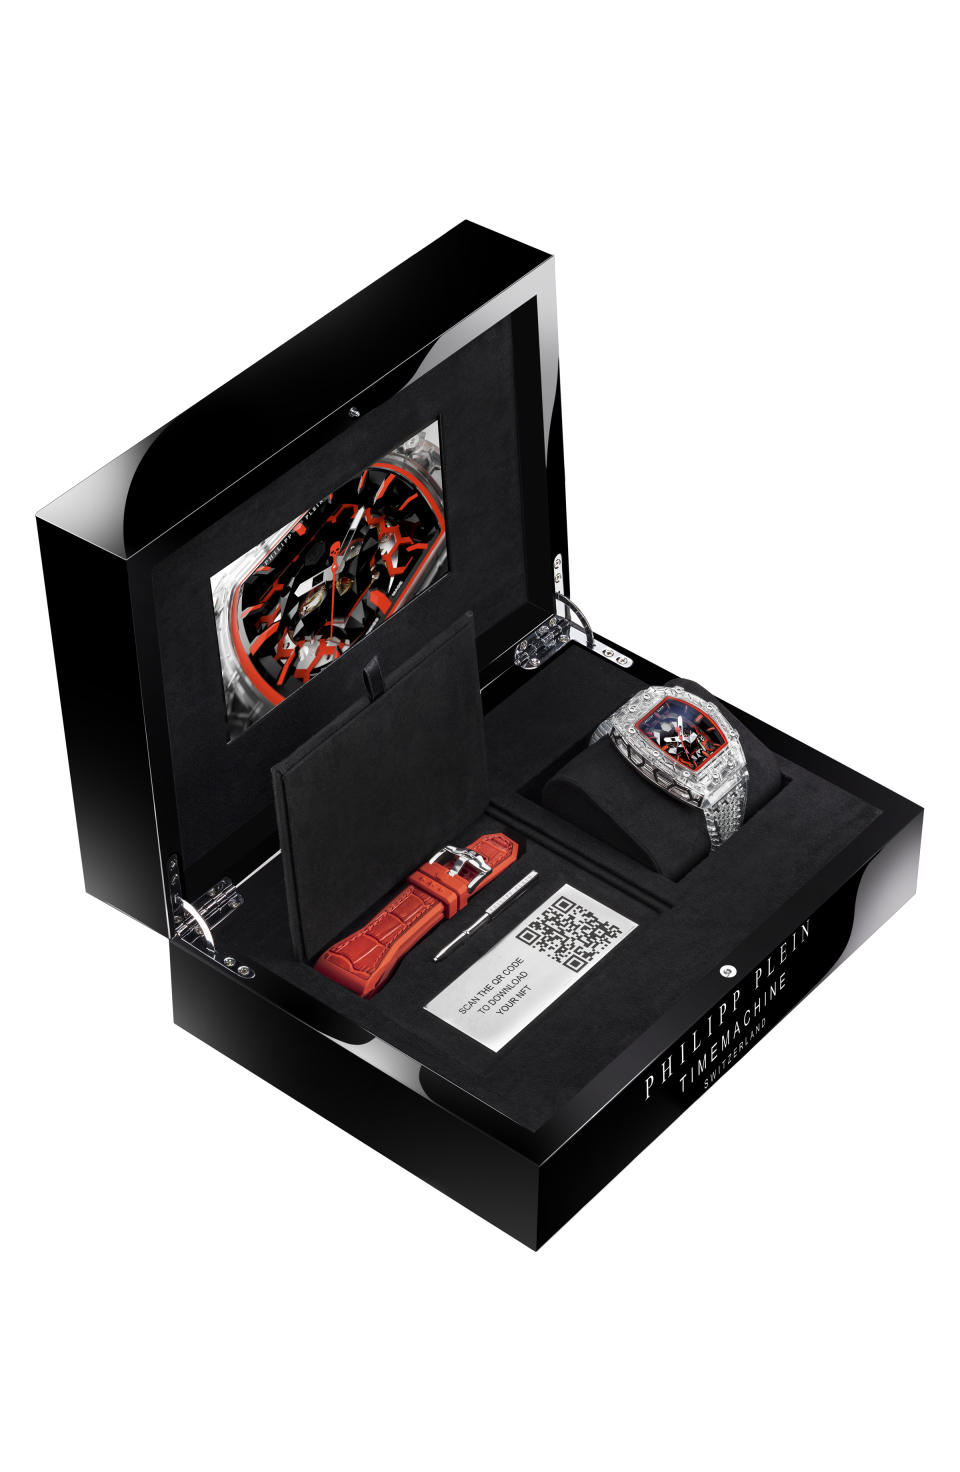 Philipp Plein's high watchmaking timepieces come in a box with a screen showcasing NFTs.